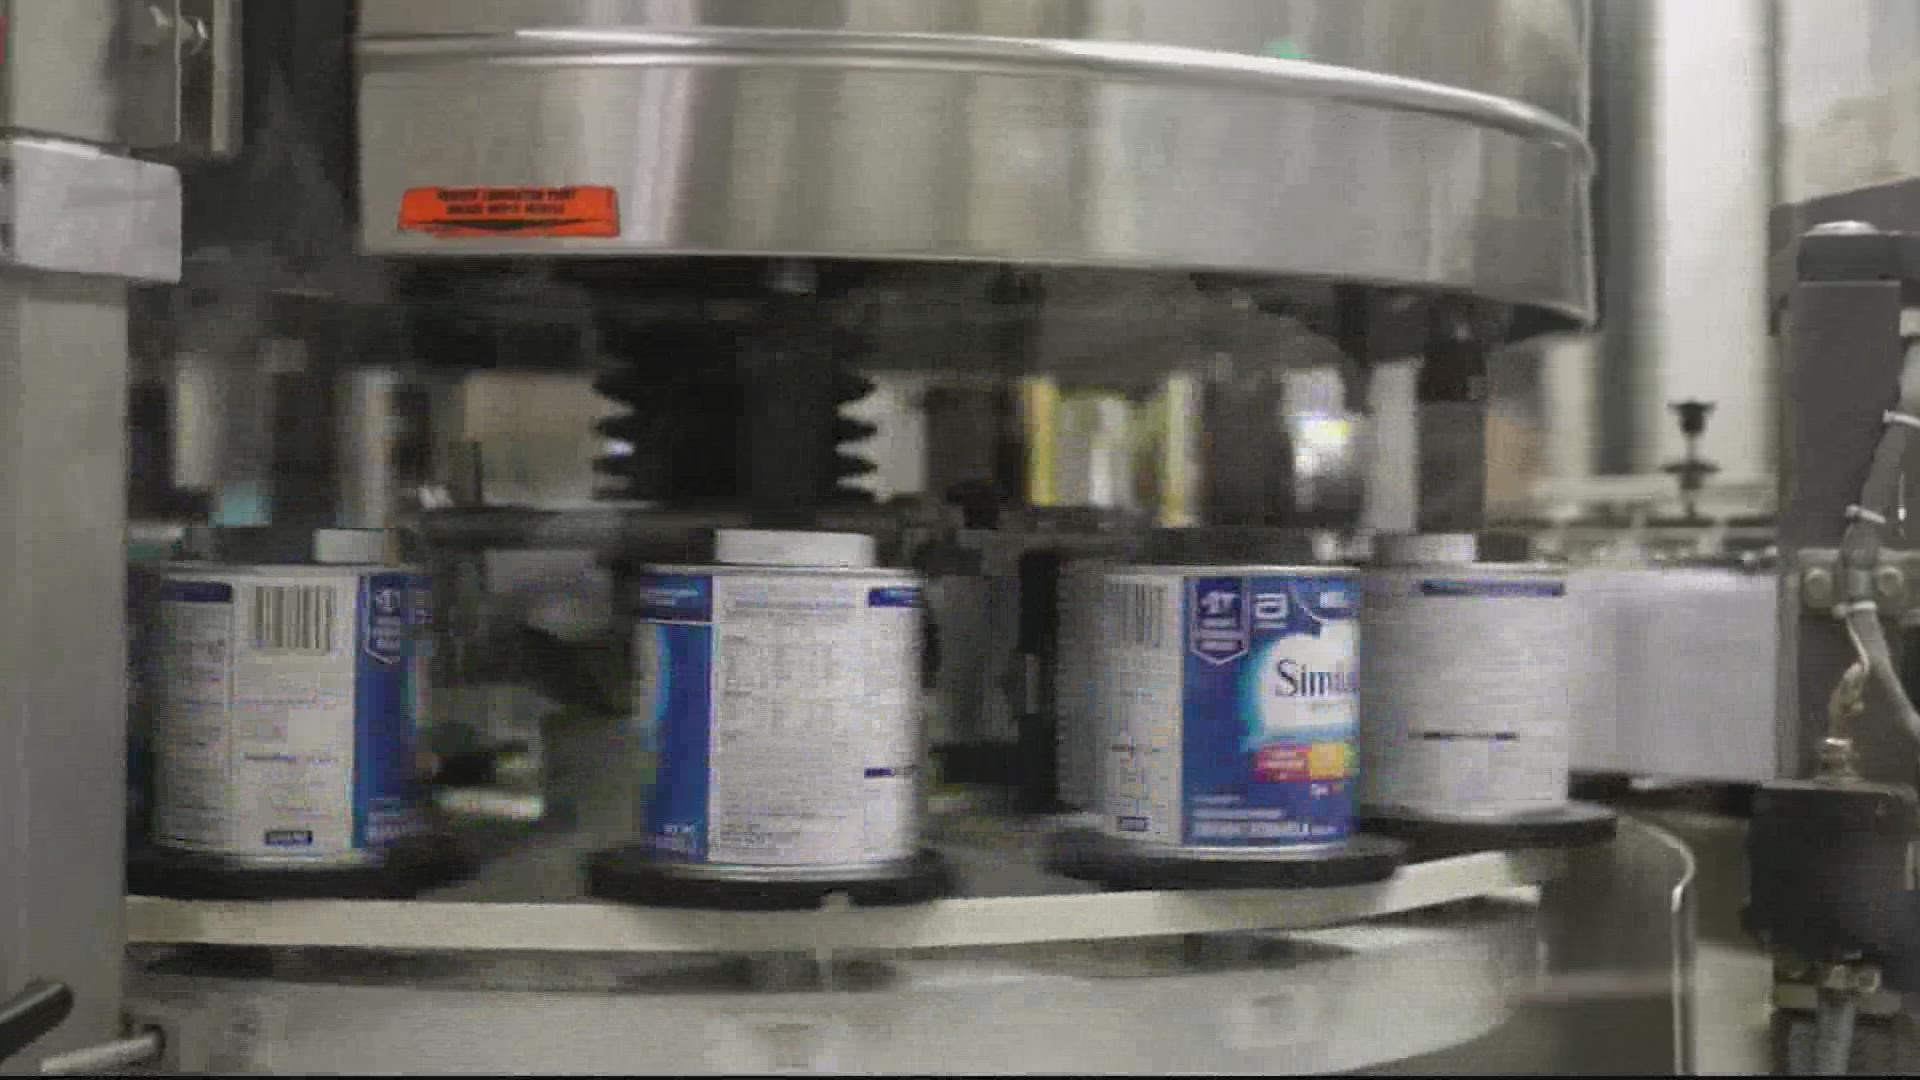 The Justice Department is investigating the Abbott Laboratories infant formula plant in Michigan that was shut down for months last year due to contamination.